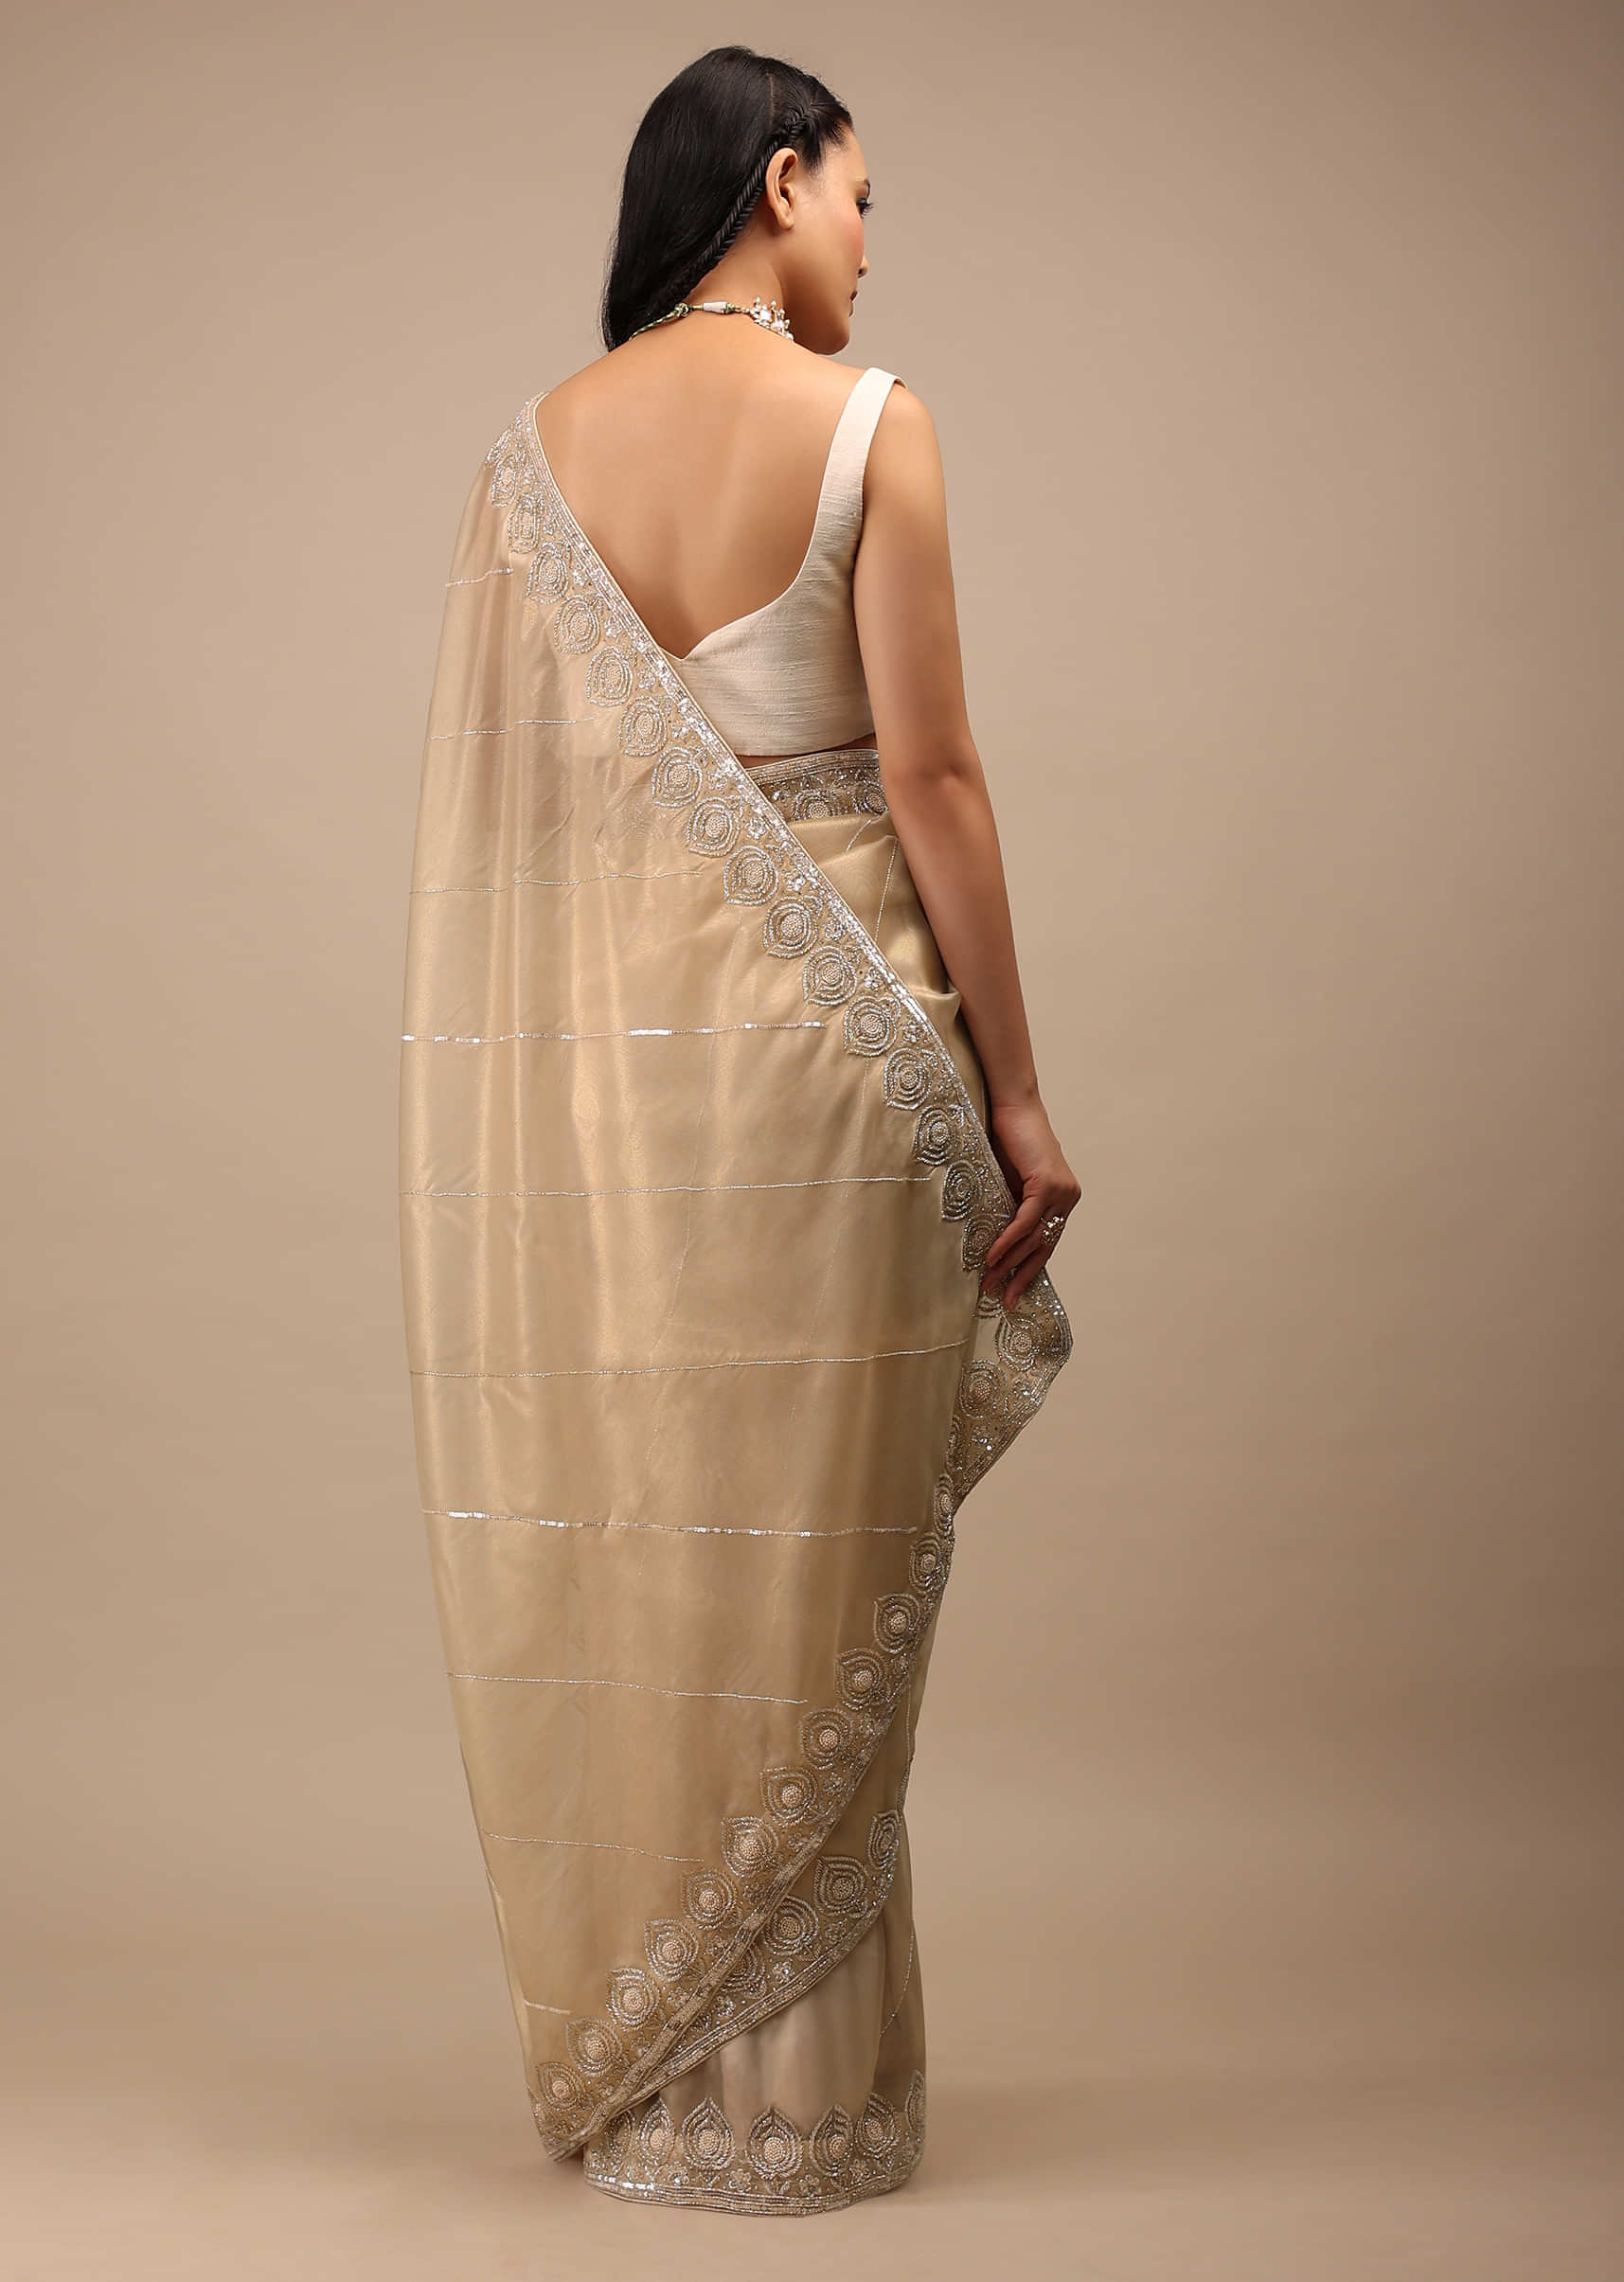 Warm Sand Brown Tissue Saree In Silver Cut Dana And Stones Embroidery Motifs Detailing On The Border